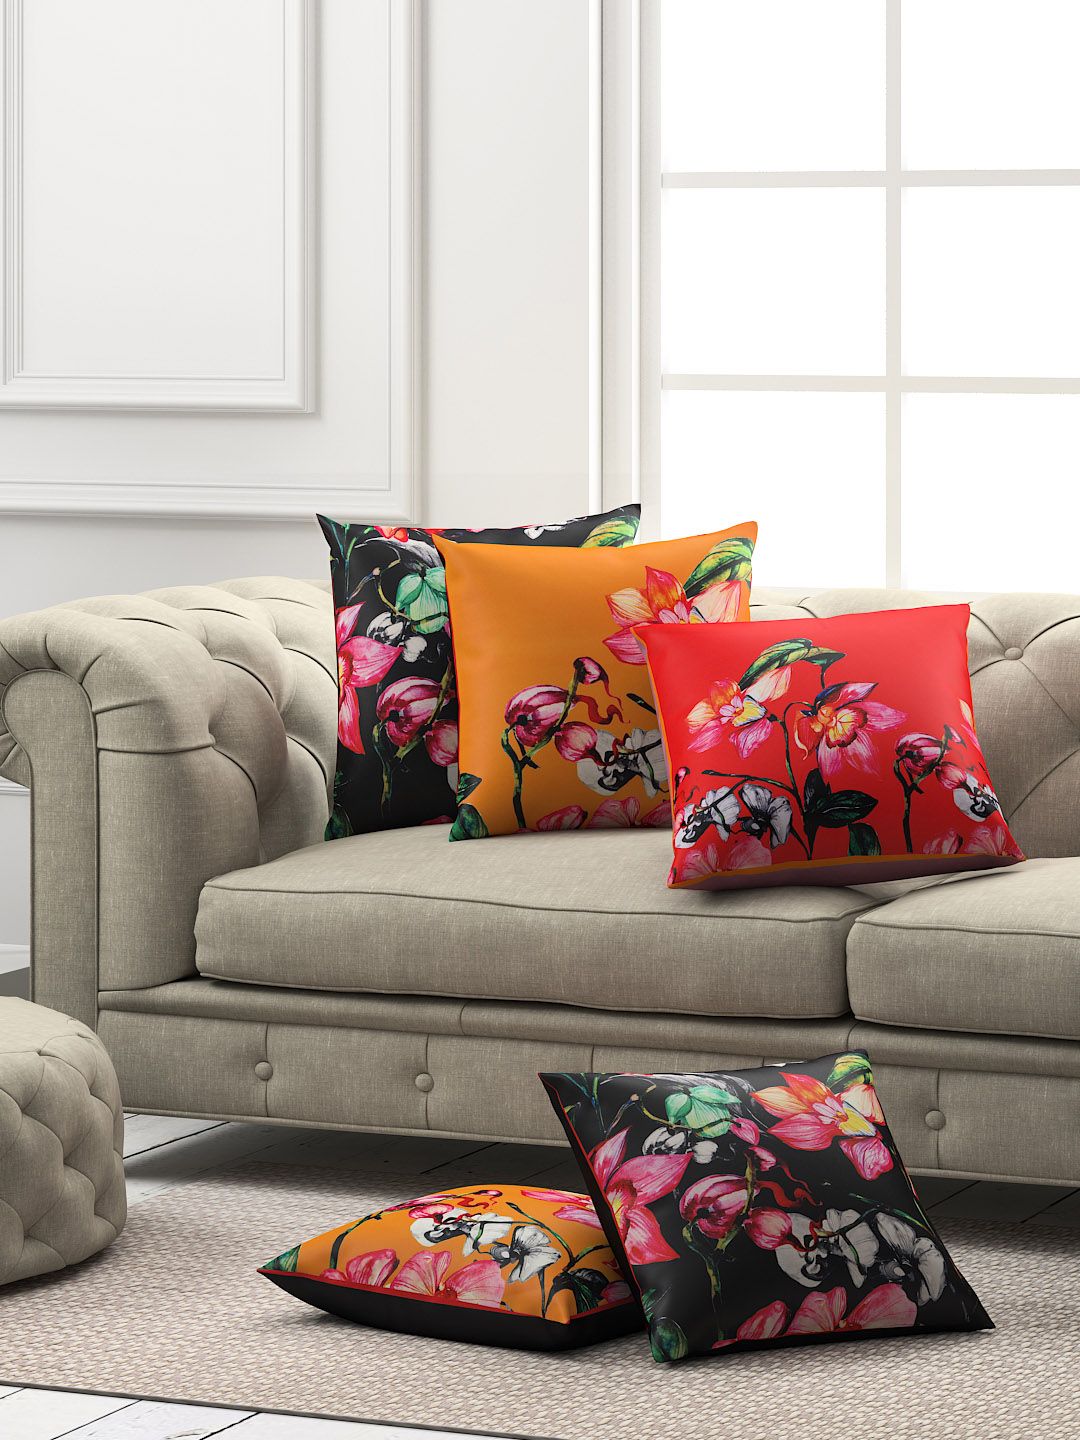 SEJ by Nisha Gupta Set of 5 Floral Square Cushion Covers Price in India